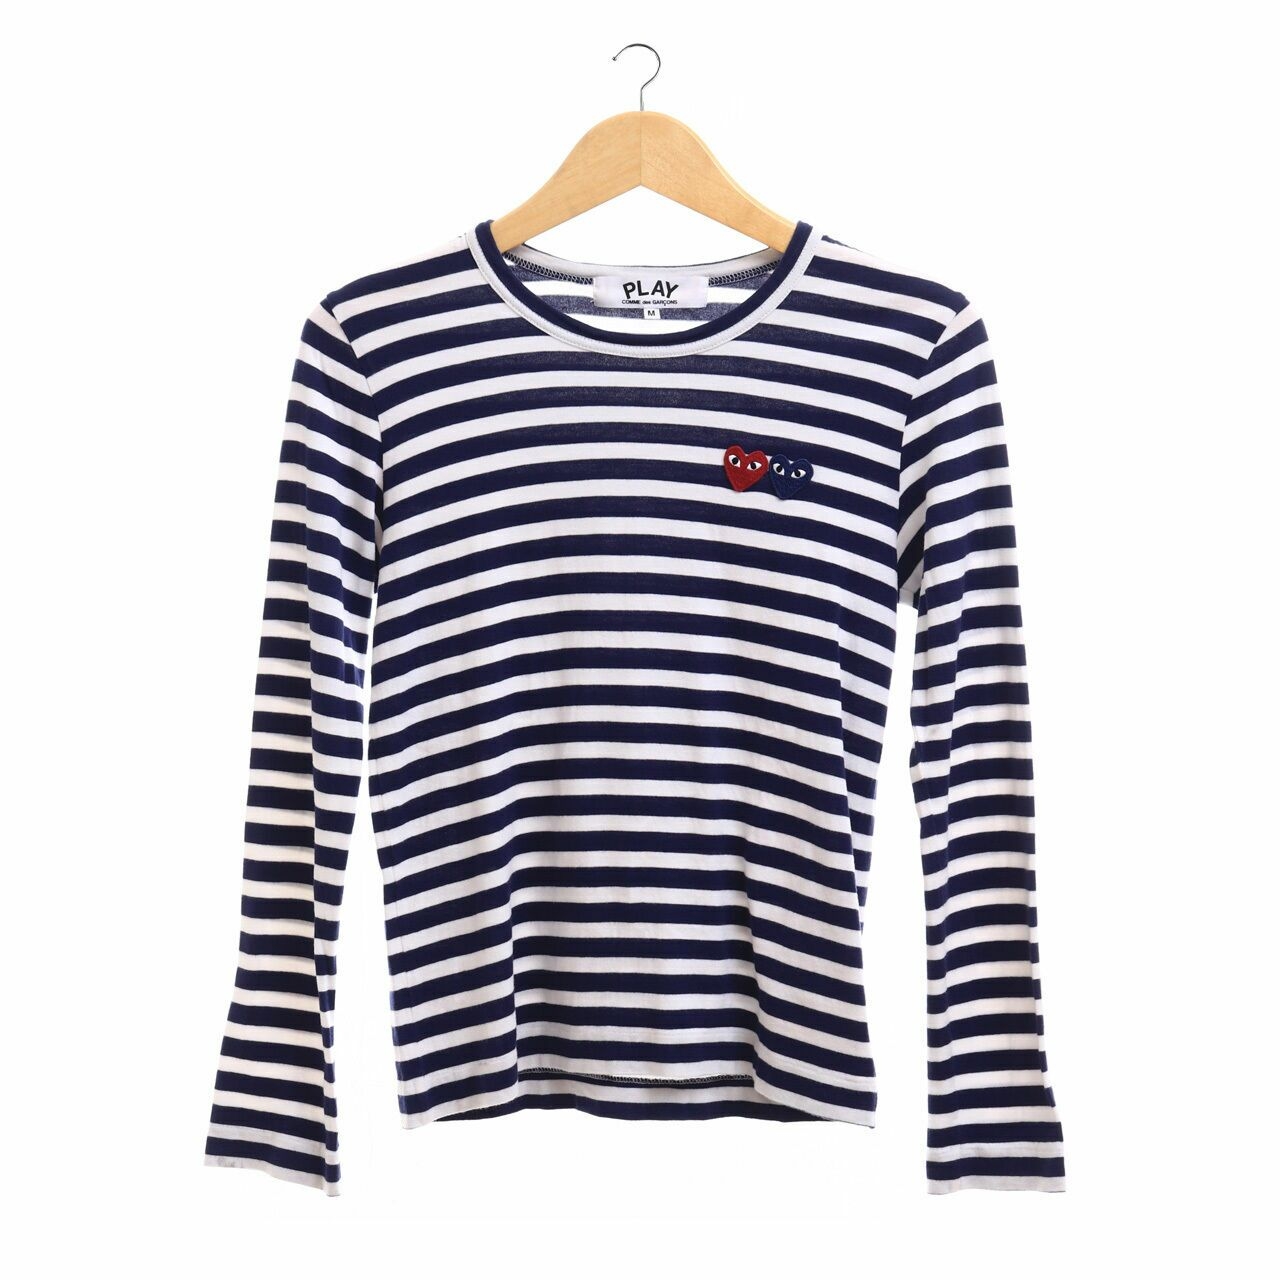 Play by Comme des Garcons White & Dark Blue Stripes T-Shirt